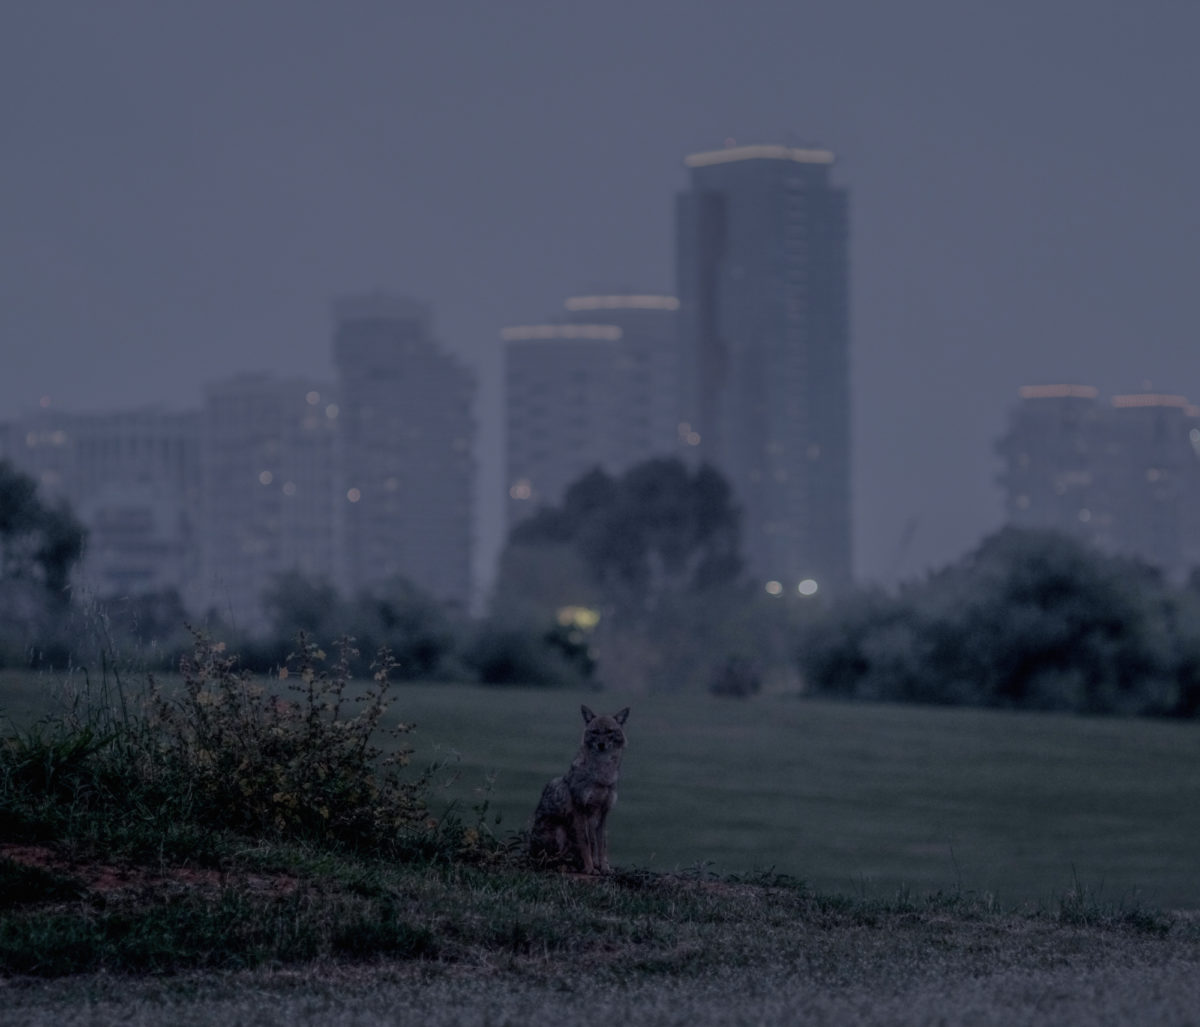 Pavel Wolberg, Jackals take over Yarkon Park in Tel Aviv in search of food during the Covid-19 lockdown, 2020. Courtesy the artist and Prix Pictet